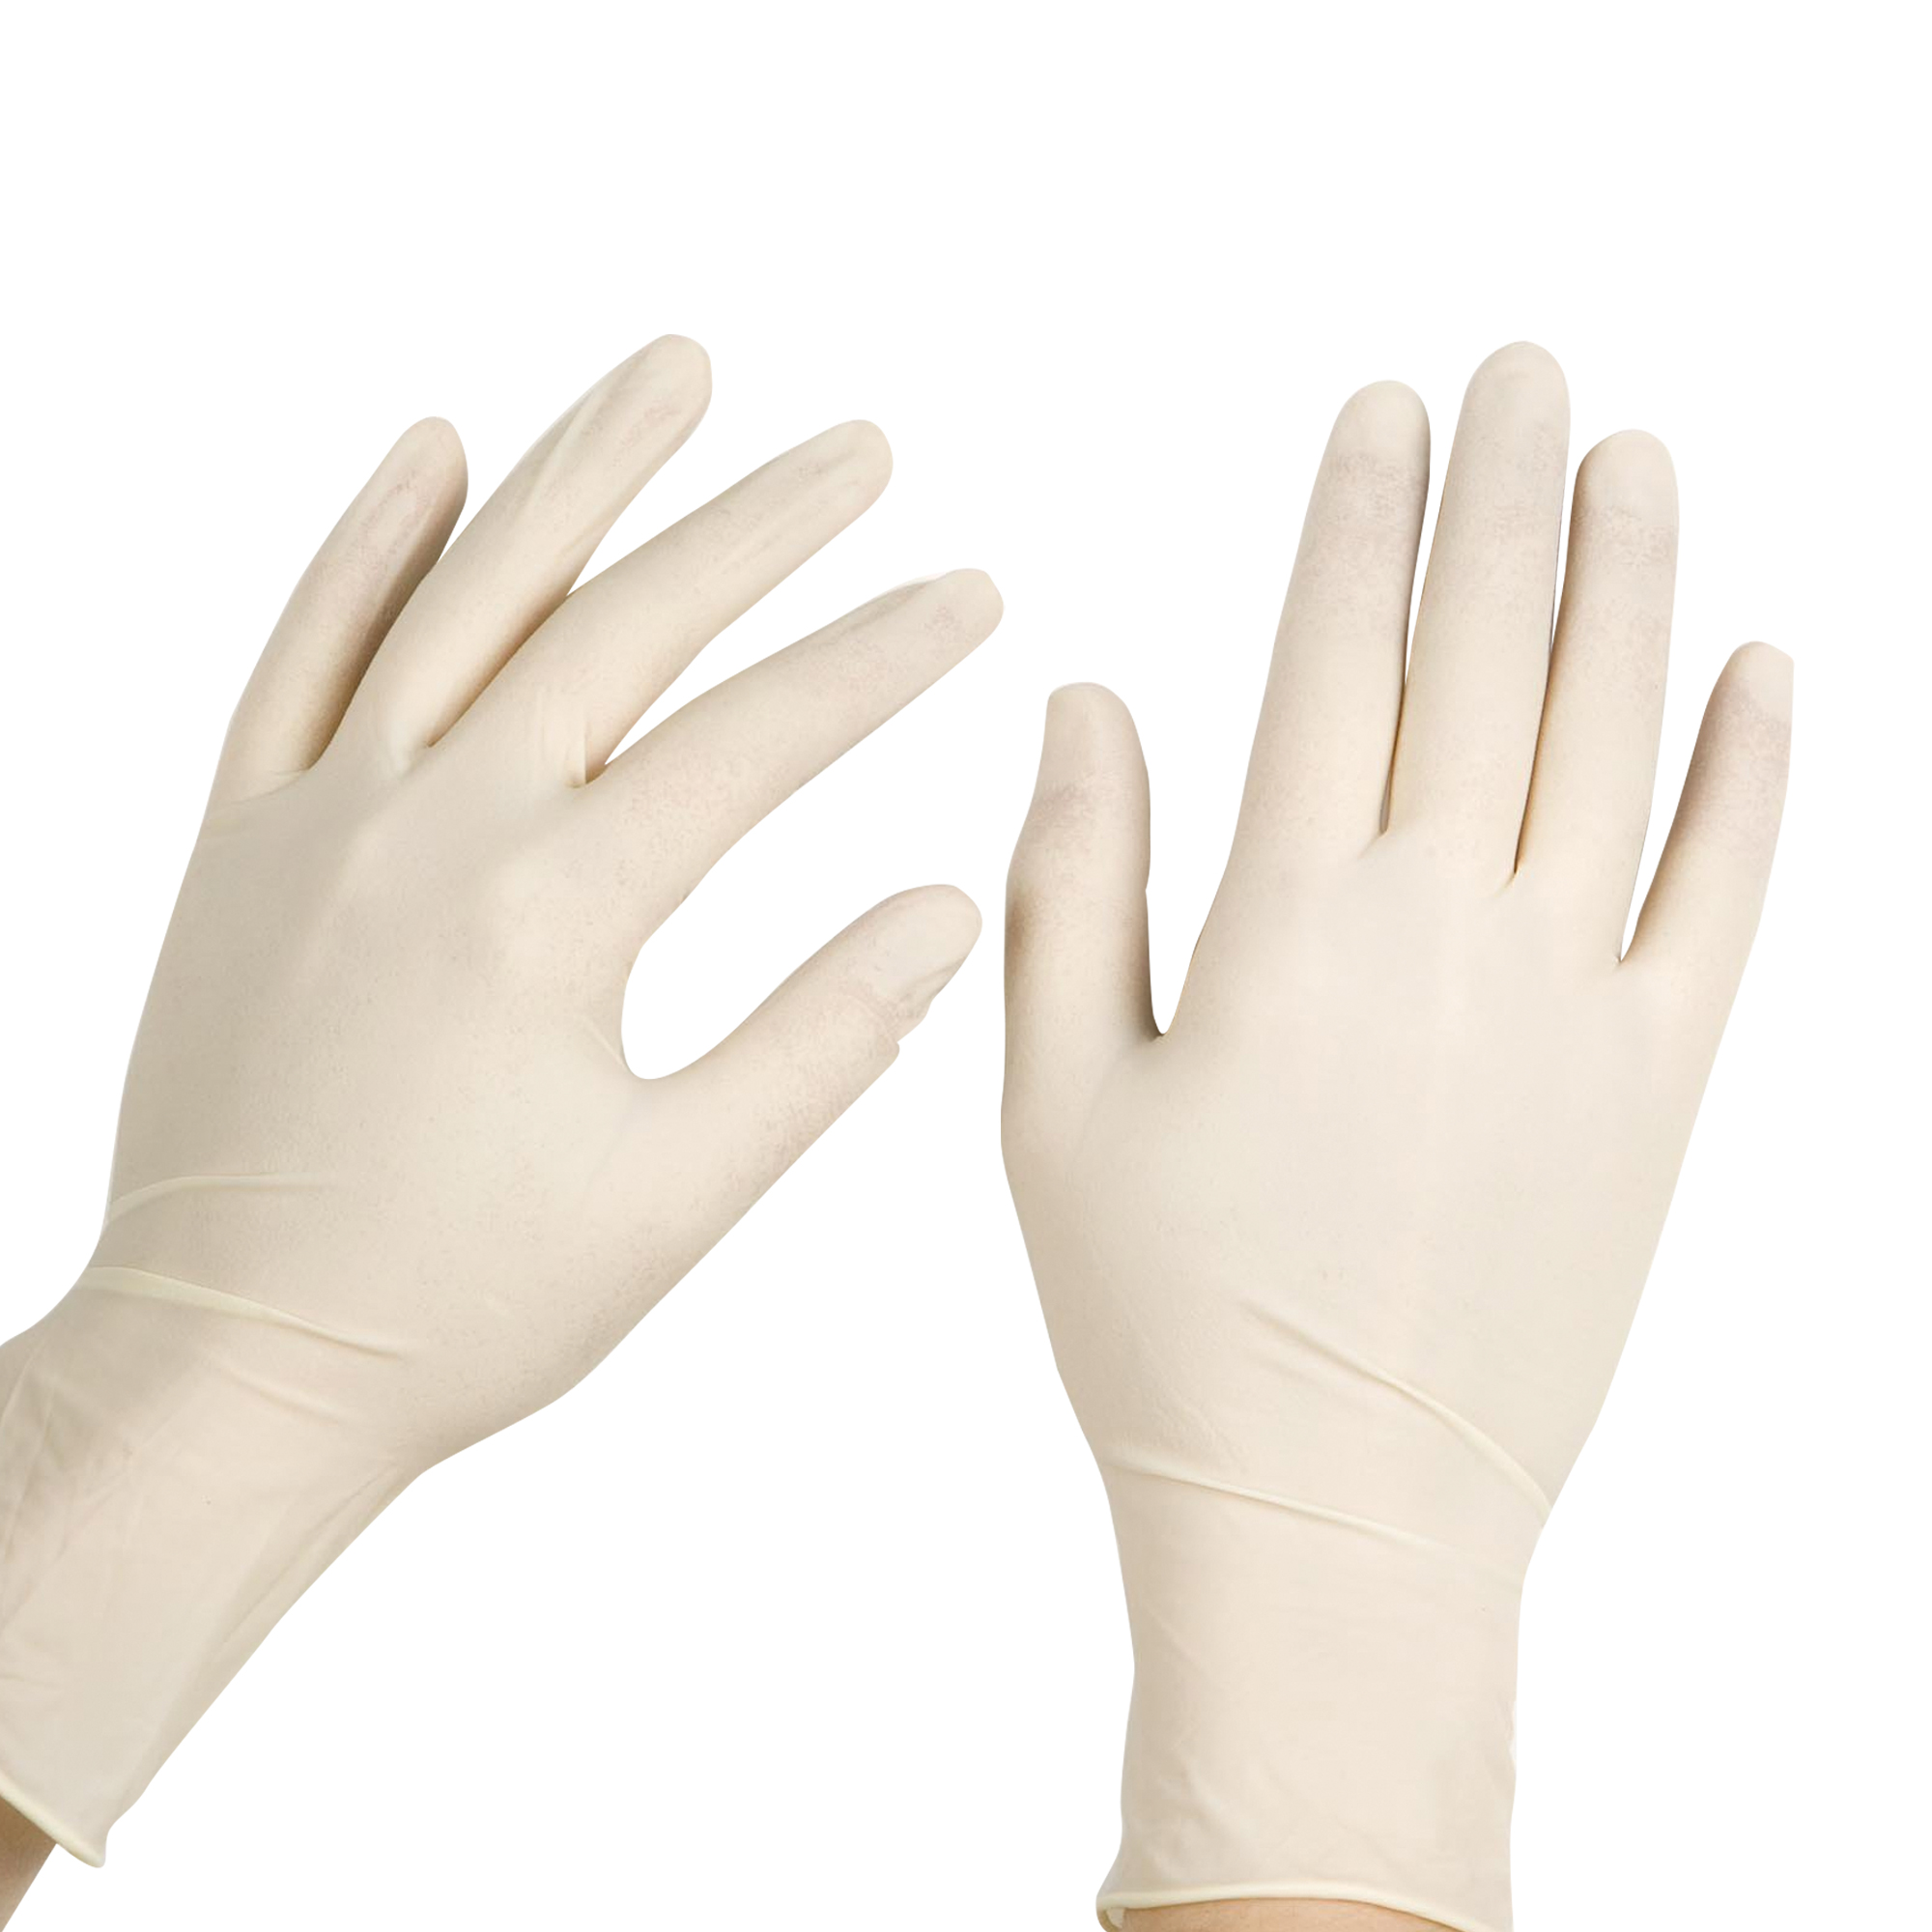 Gloves Synthetic (Stretch Vinyl) Powder Free Large - Pack 100  - Case 10